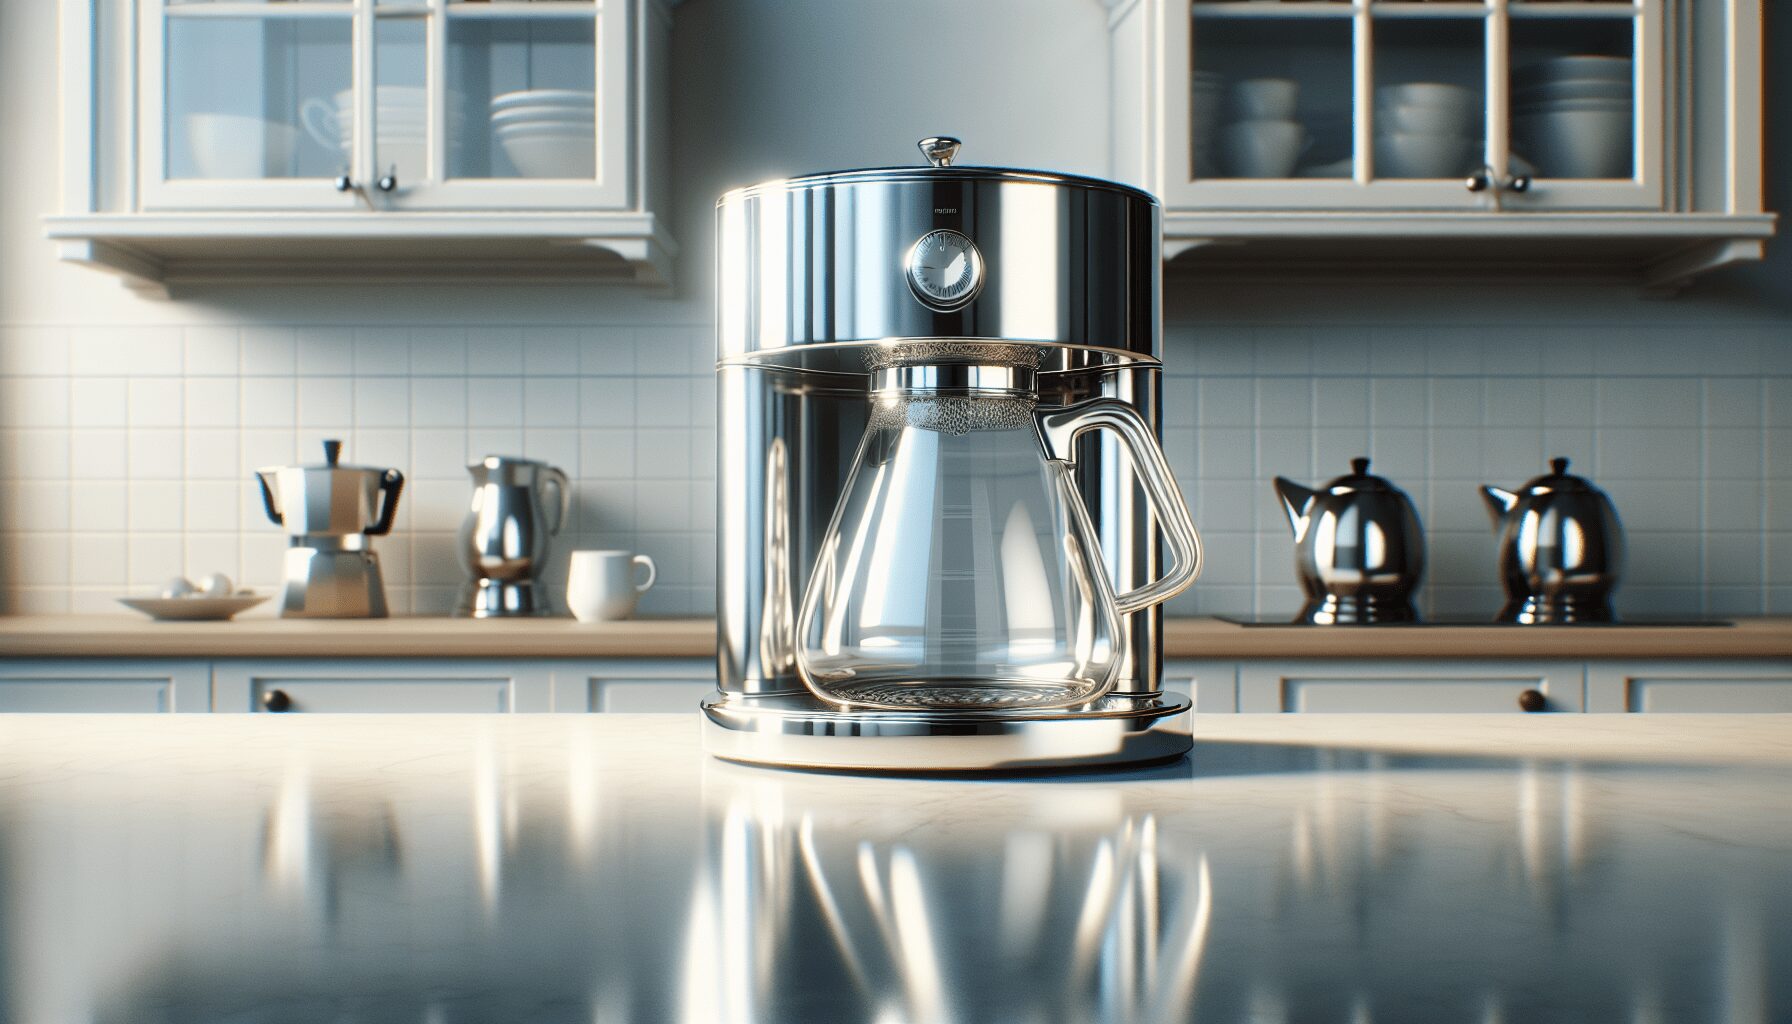 How to Clean a Breville Coffee Maker